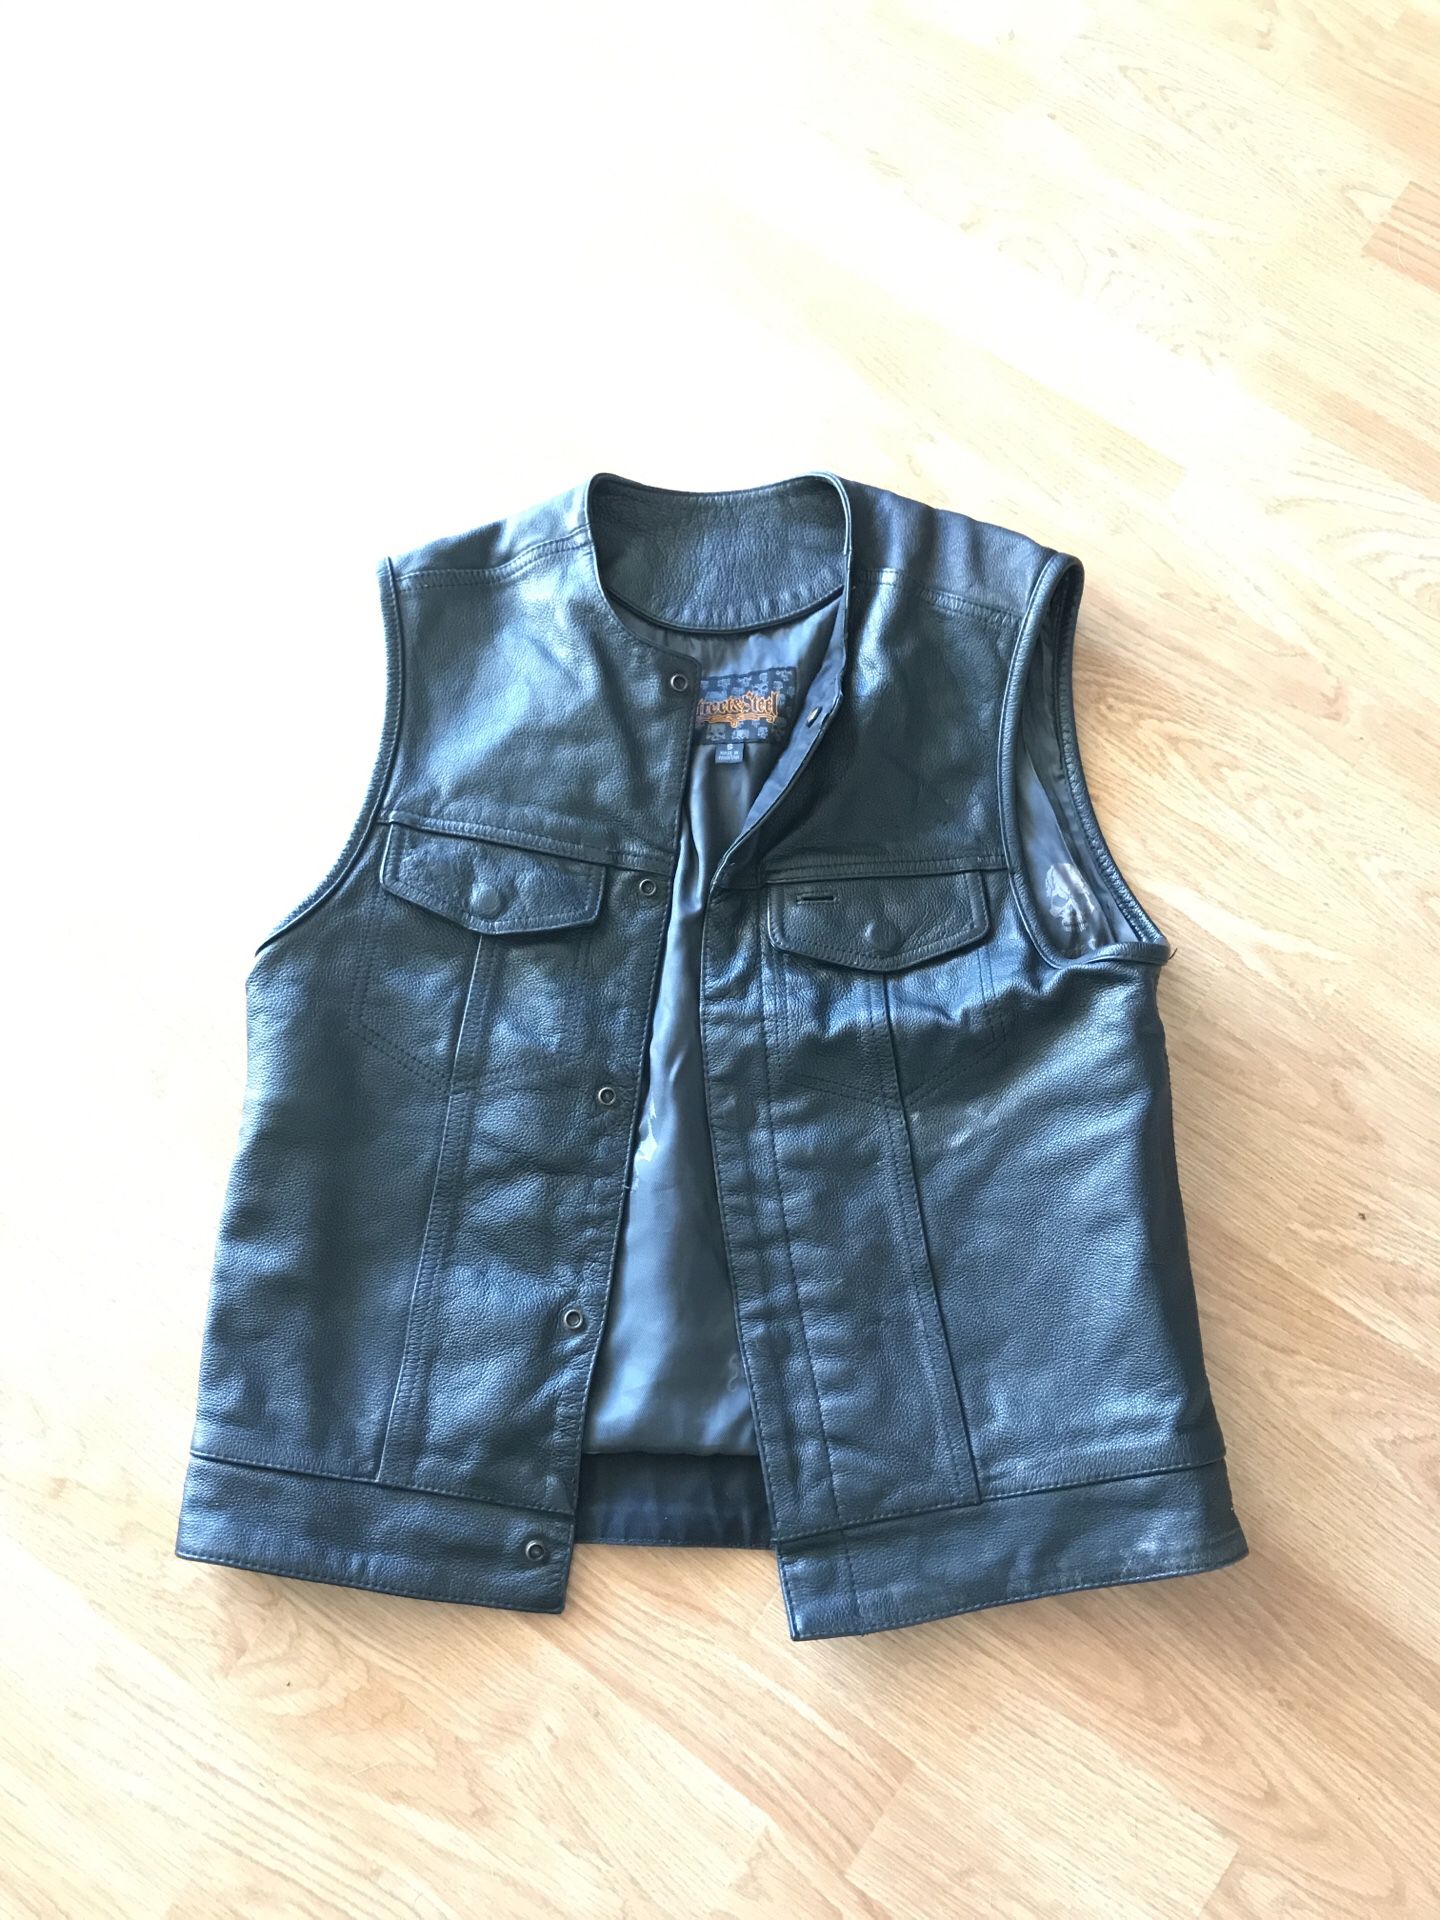 Motorcycle leather vest